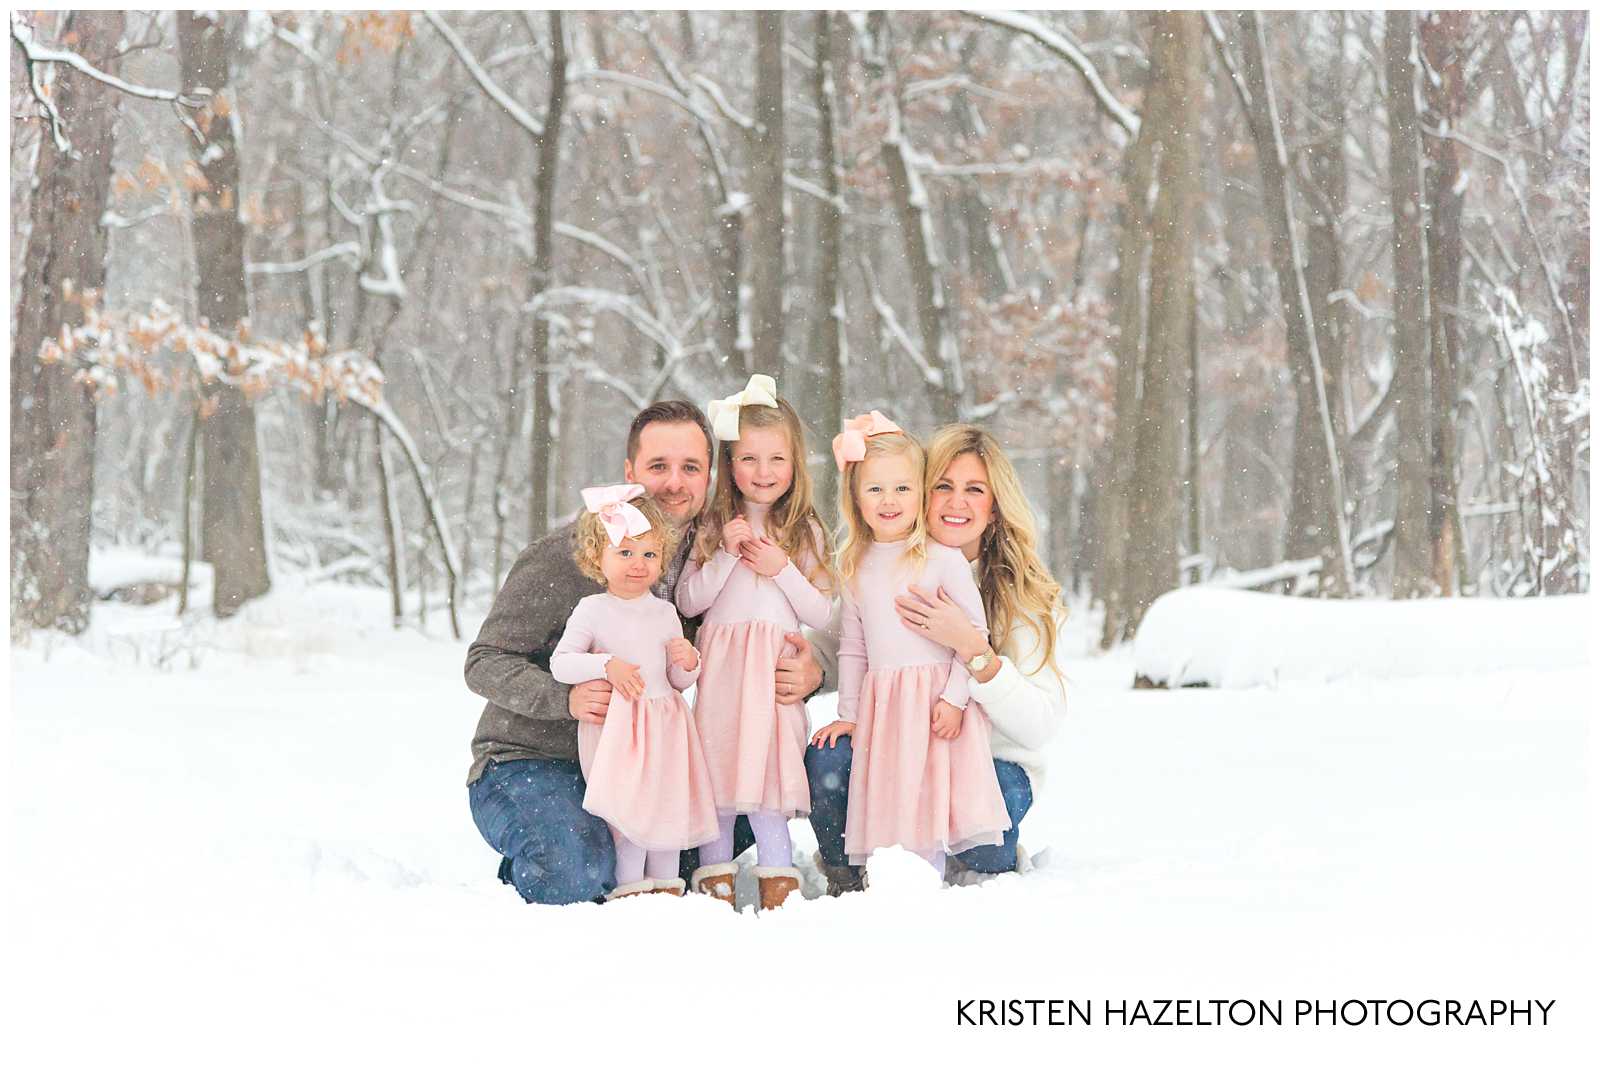 Family with three young daughters in the snowy woods - winter photoshoot ideas by Kristen Hazelton